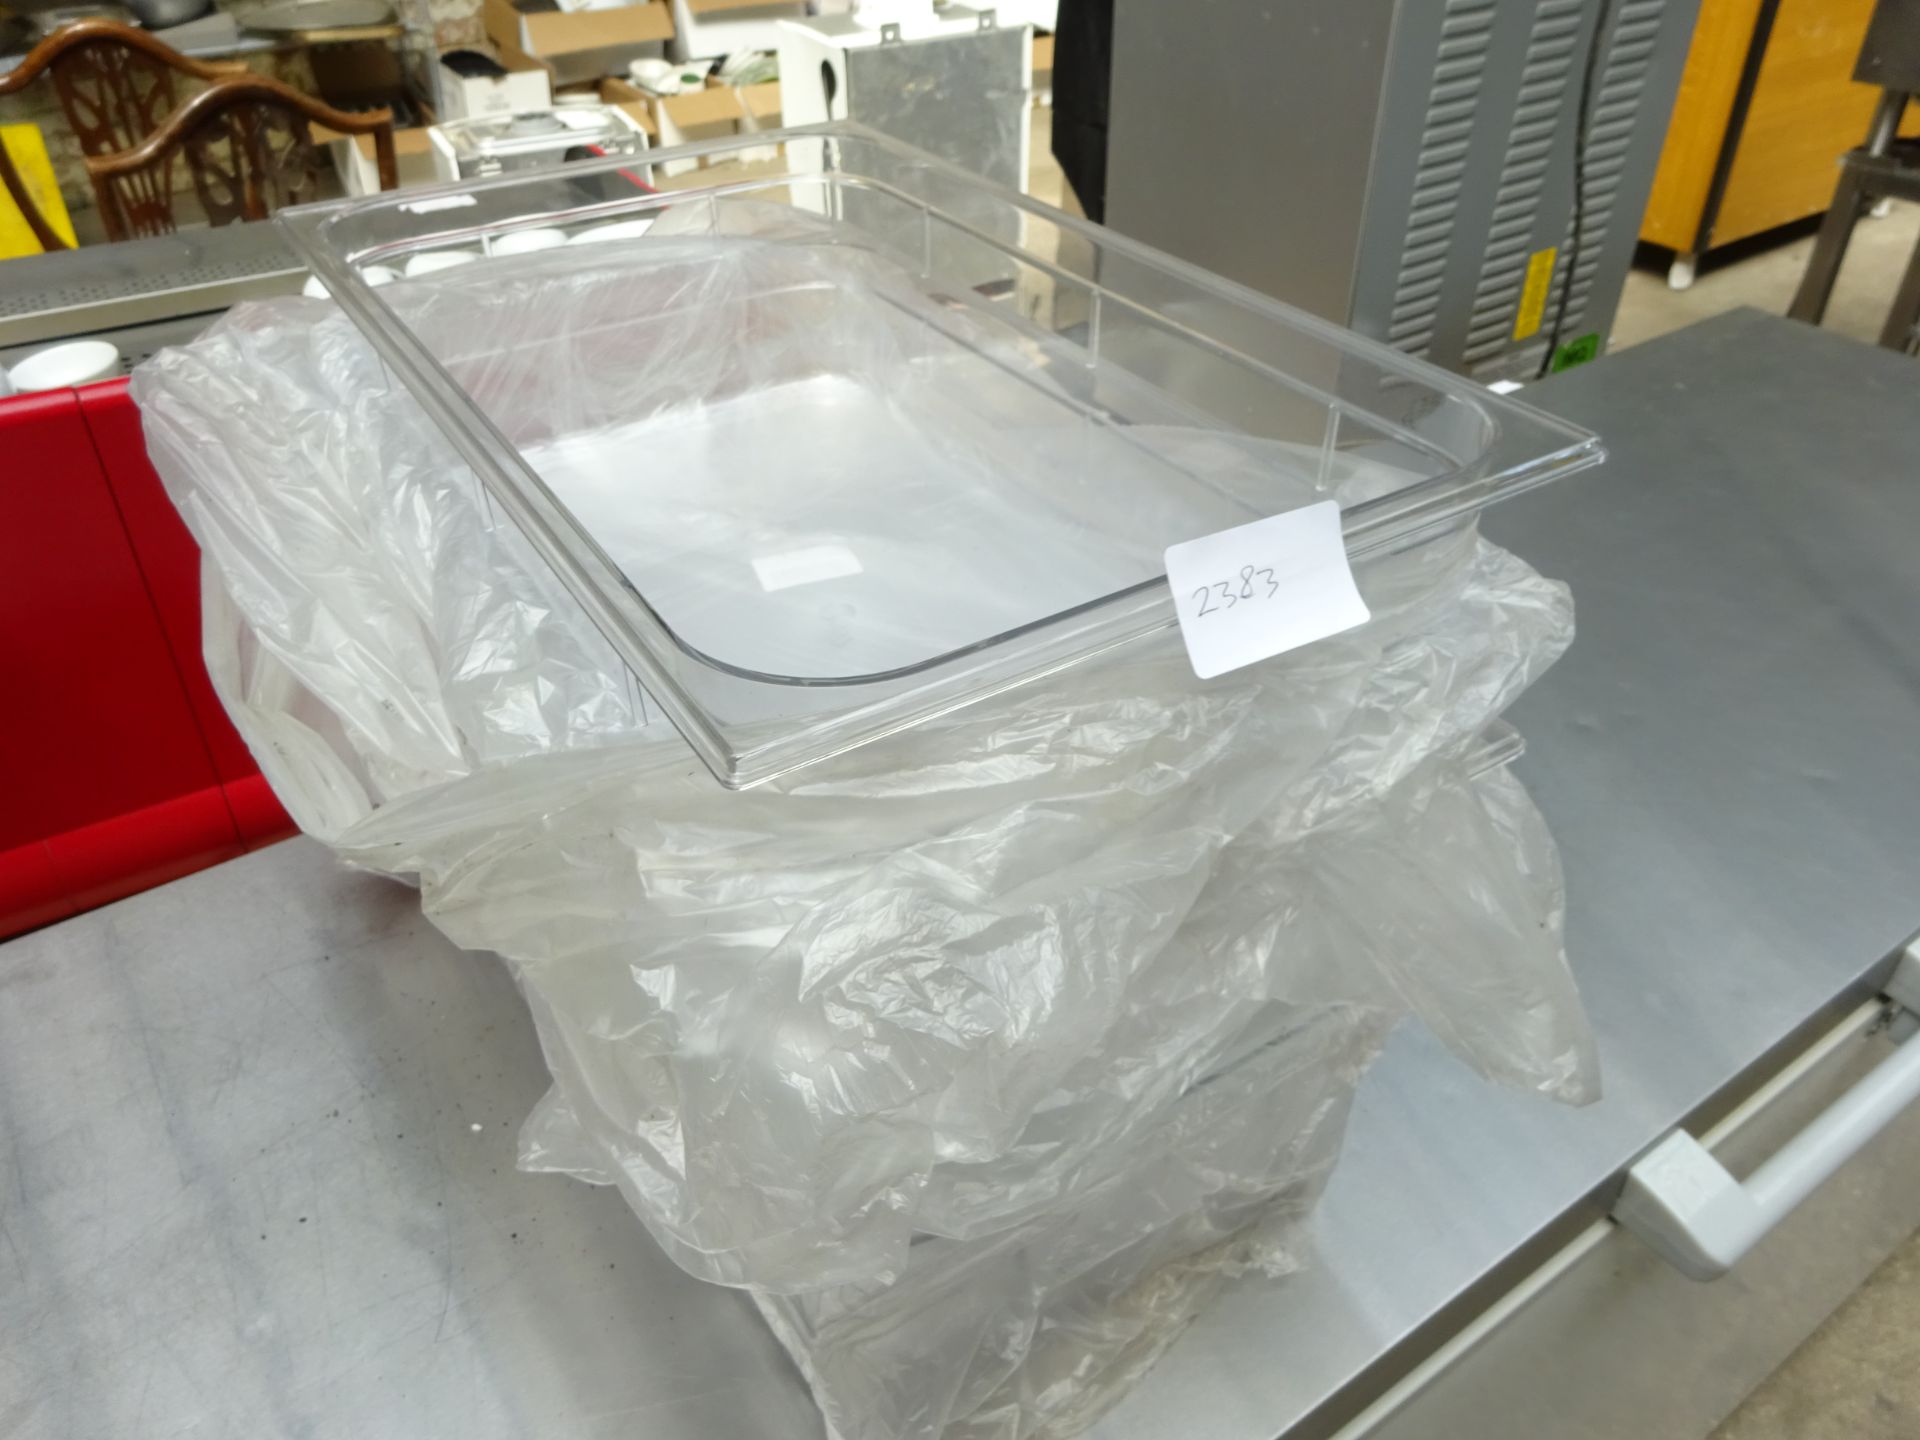 5 large clear plastic food containers.